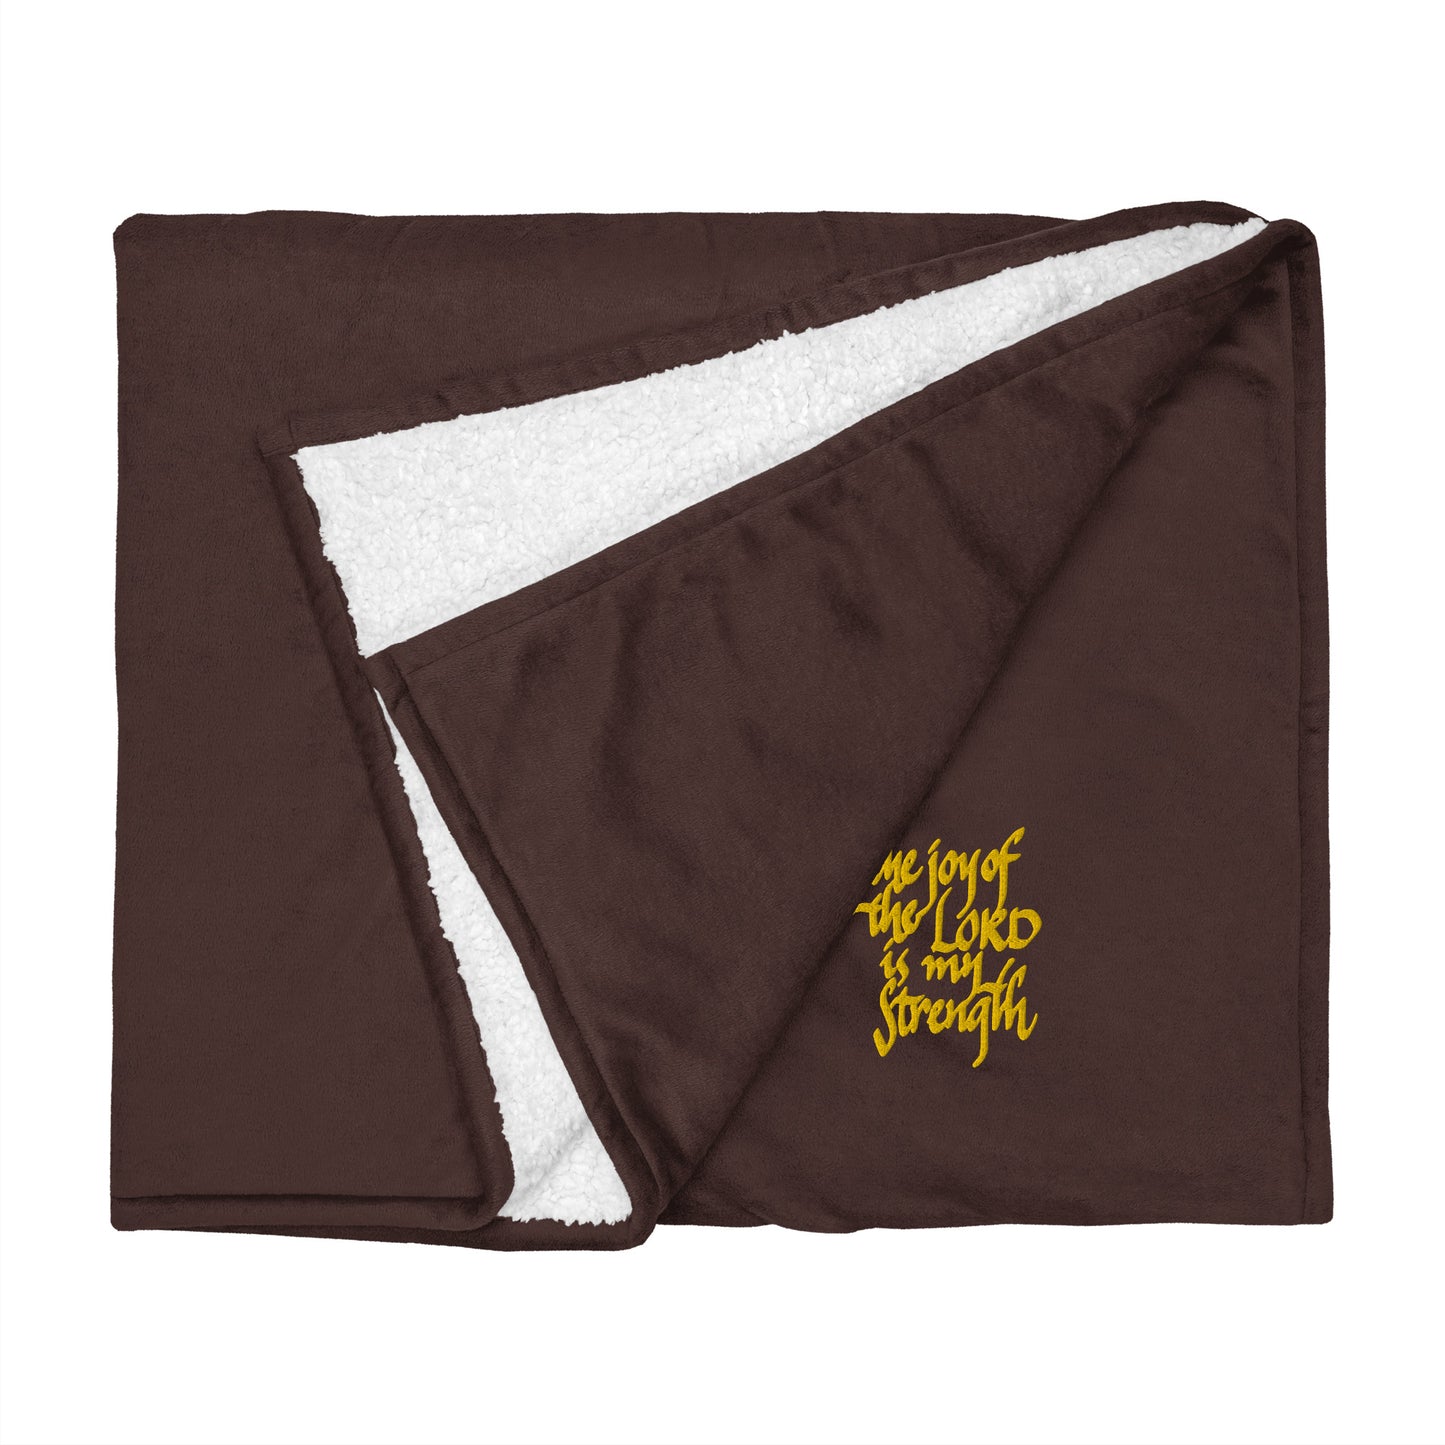 The Joy of the Lord is my Strength: Premium Embroidered Sherpa Blanket 50″ × 60″